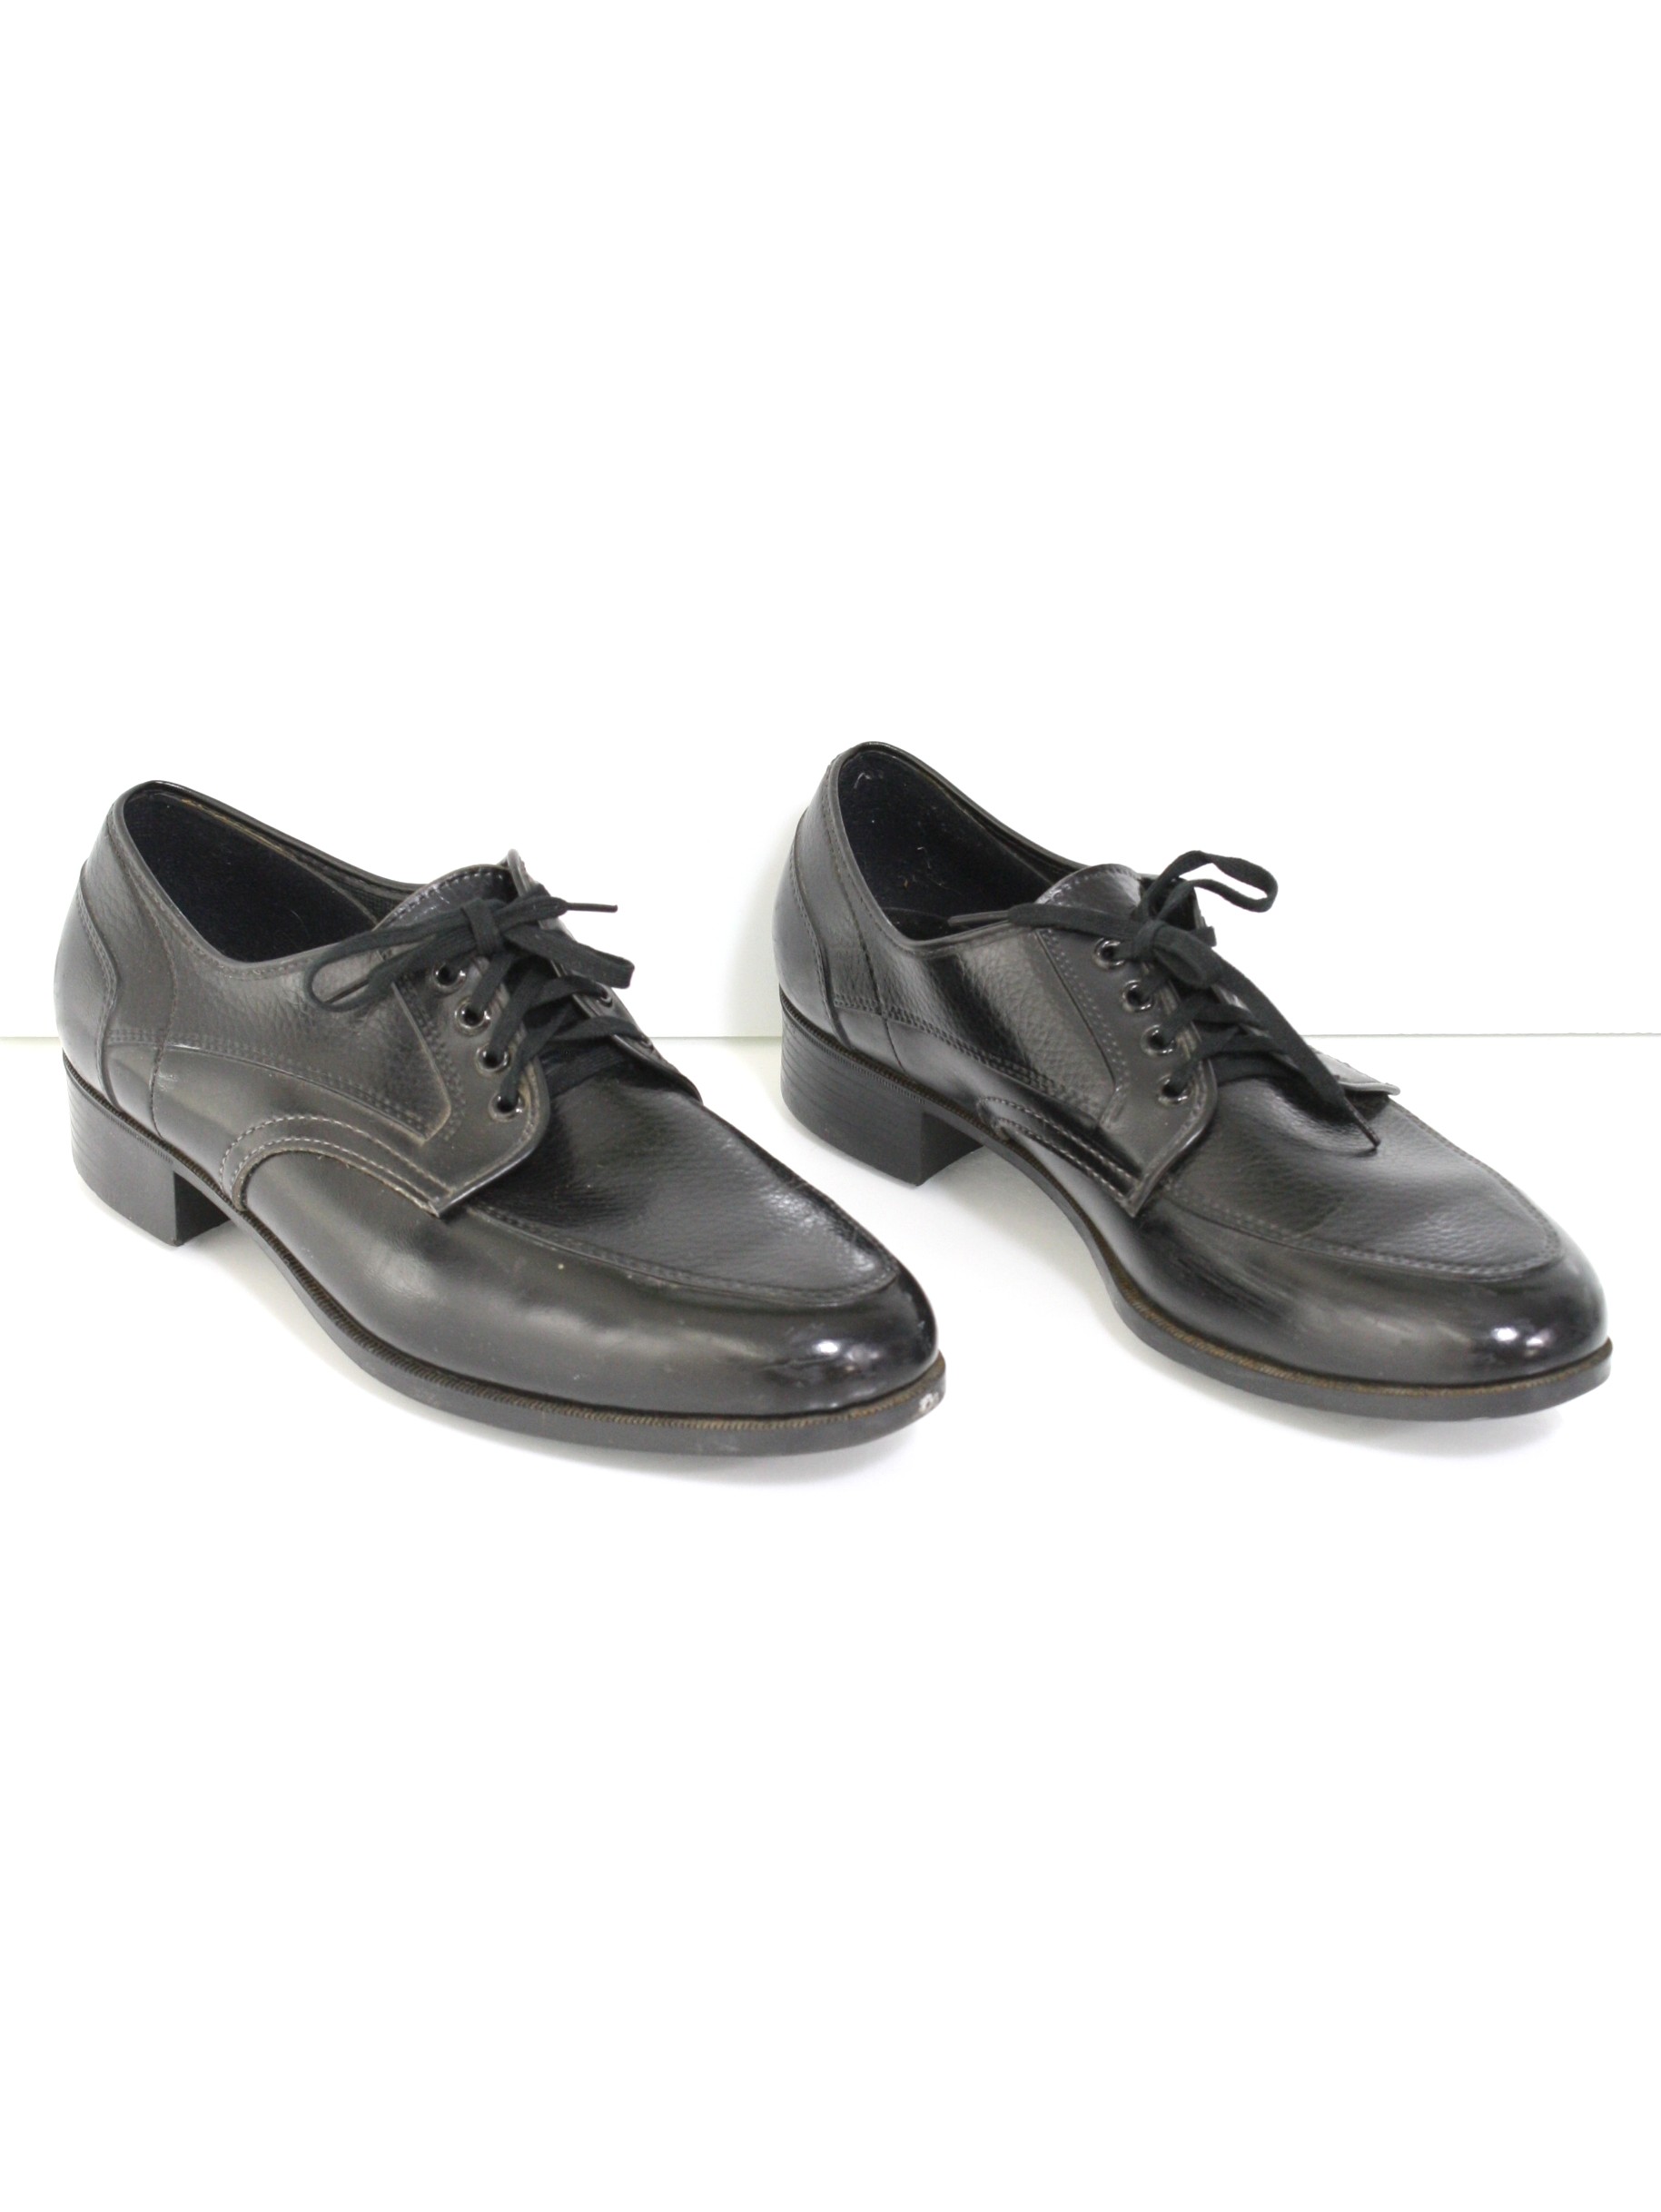 60's Shoes: 60s -No Label- Mens black pebble grain and smooth oxford ...